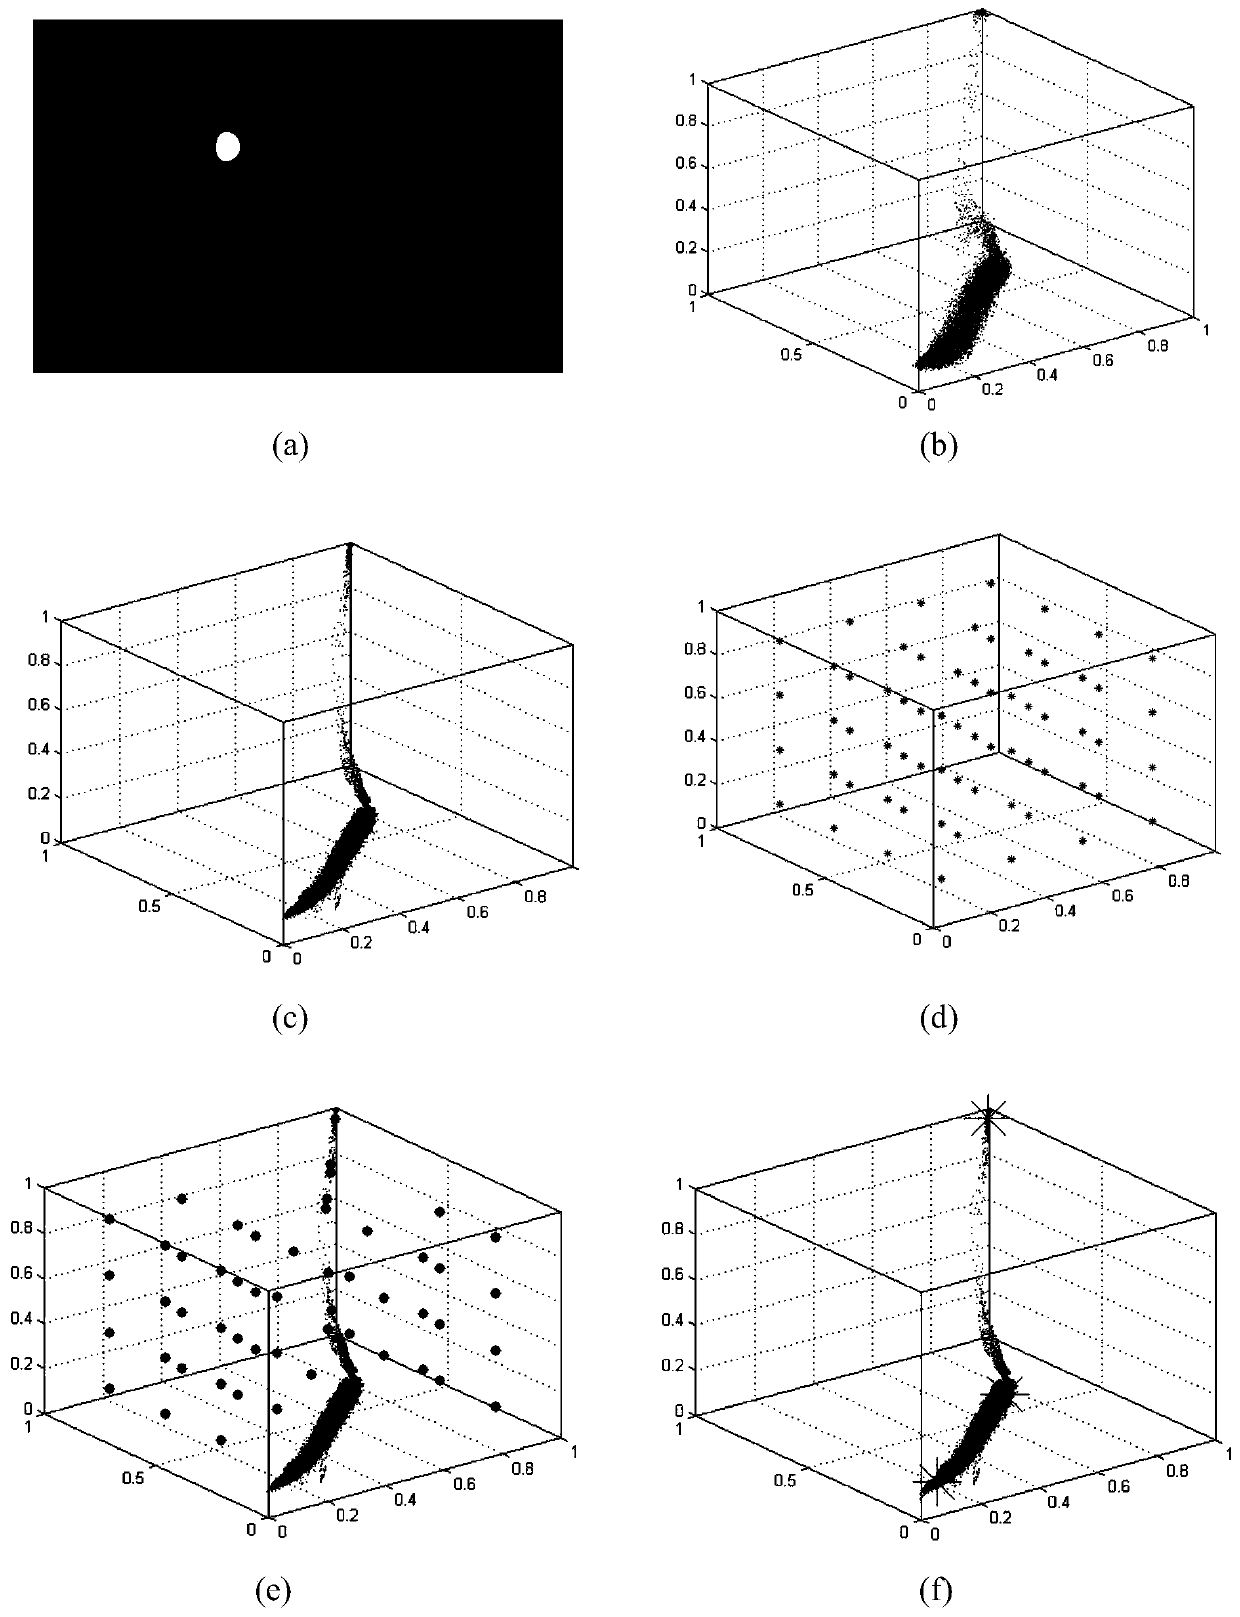 Unsupervised Segmentation of Natural Images Based on Mean Shift and Fuzzy Clustering